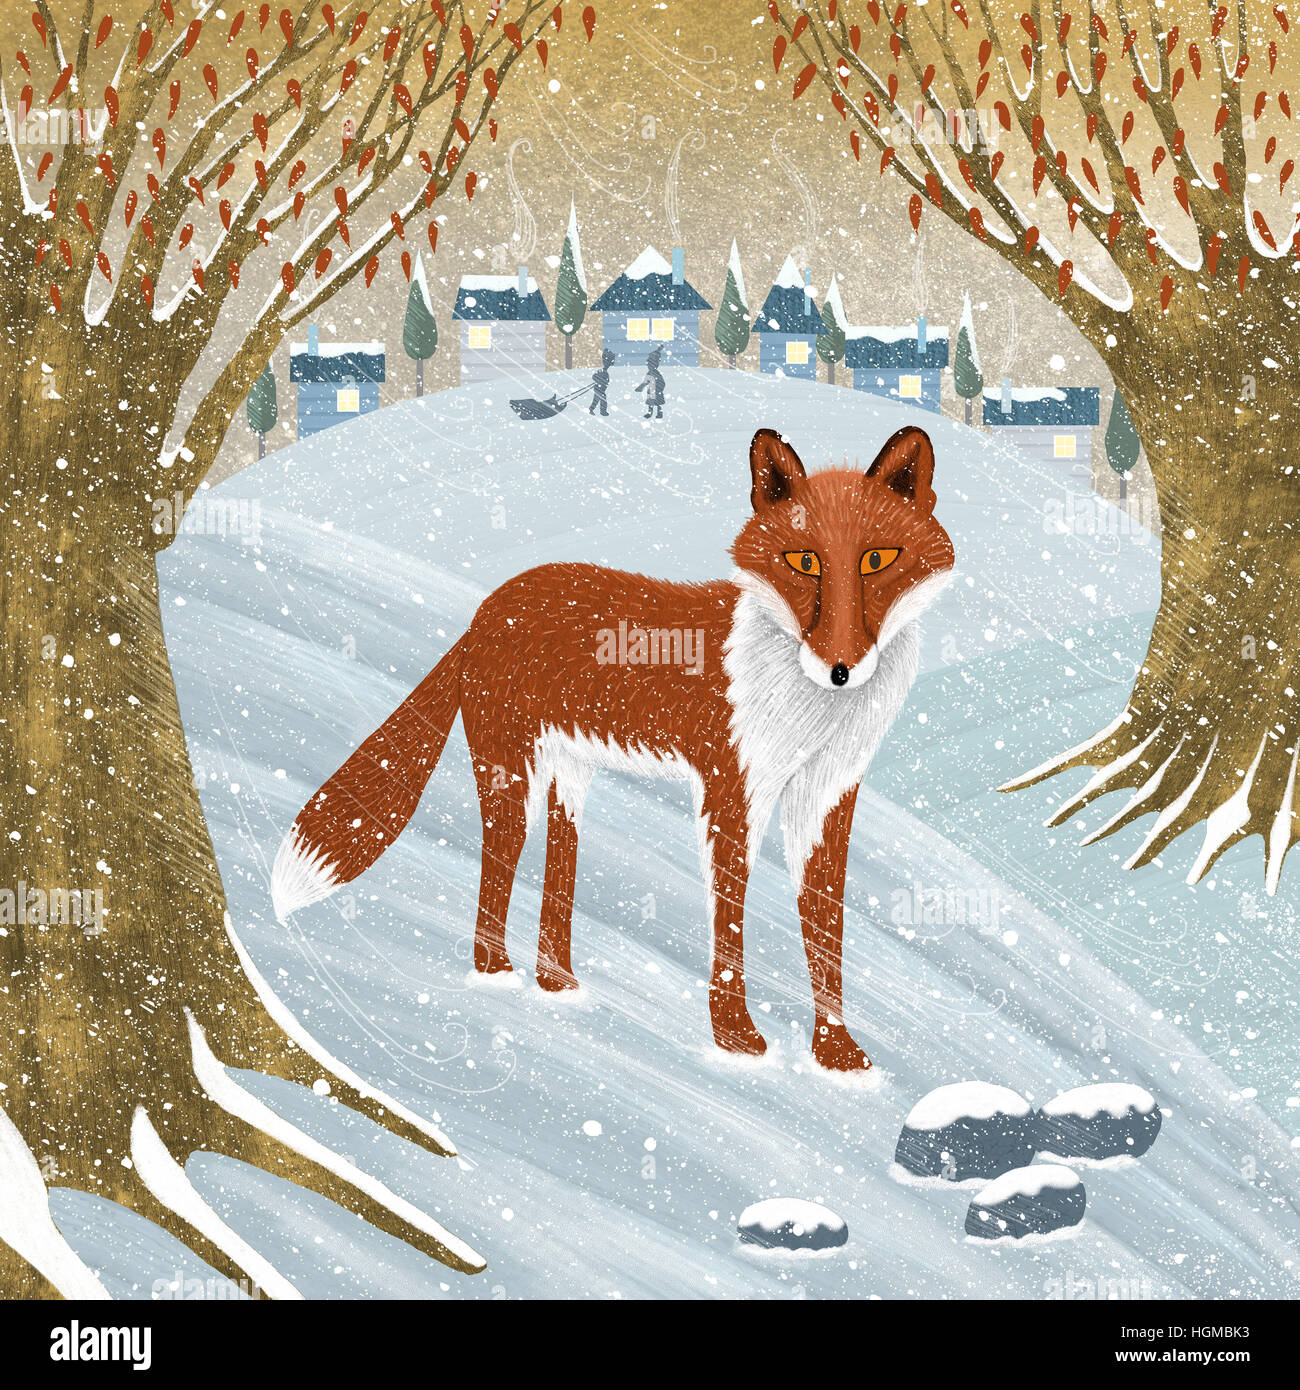 An illustration of a fox in a snowy landscape with children in the distance. Stock Photo